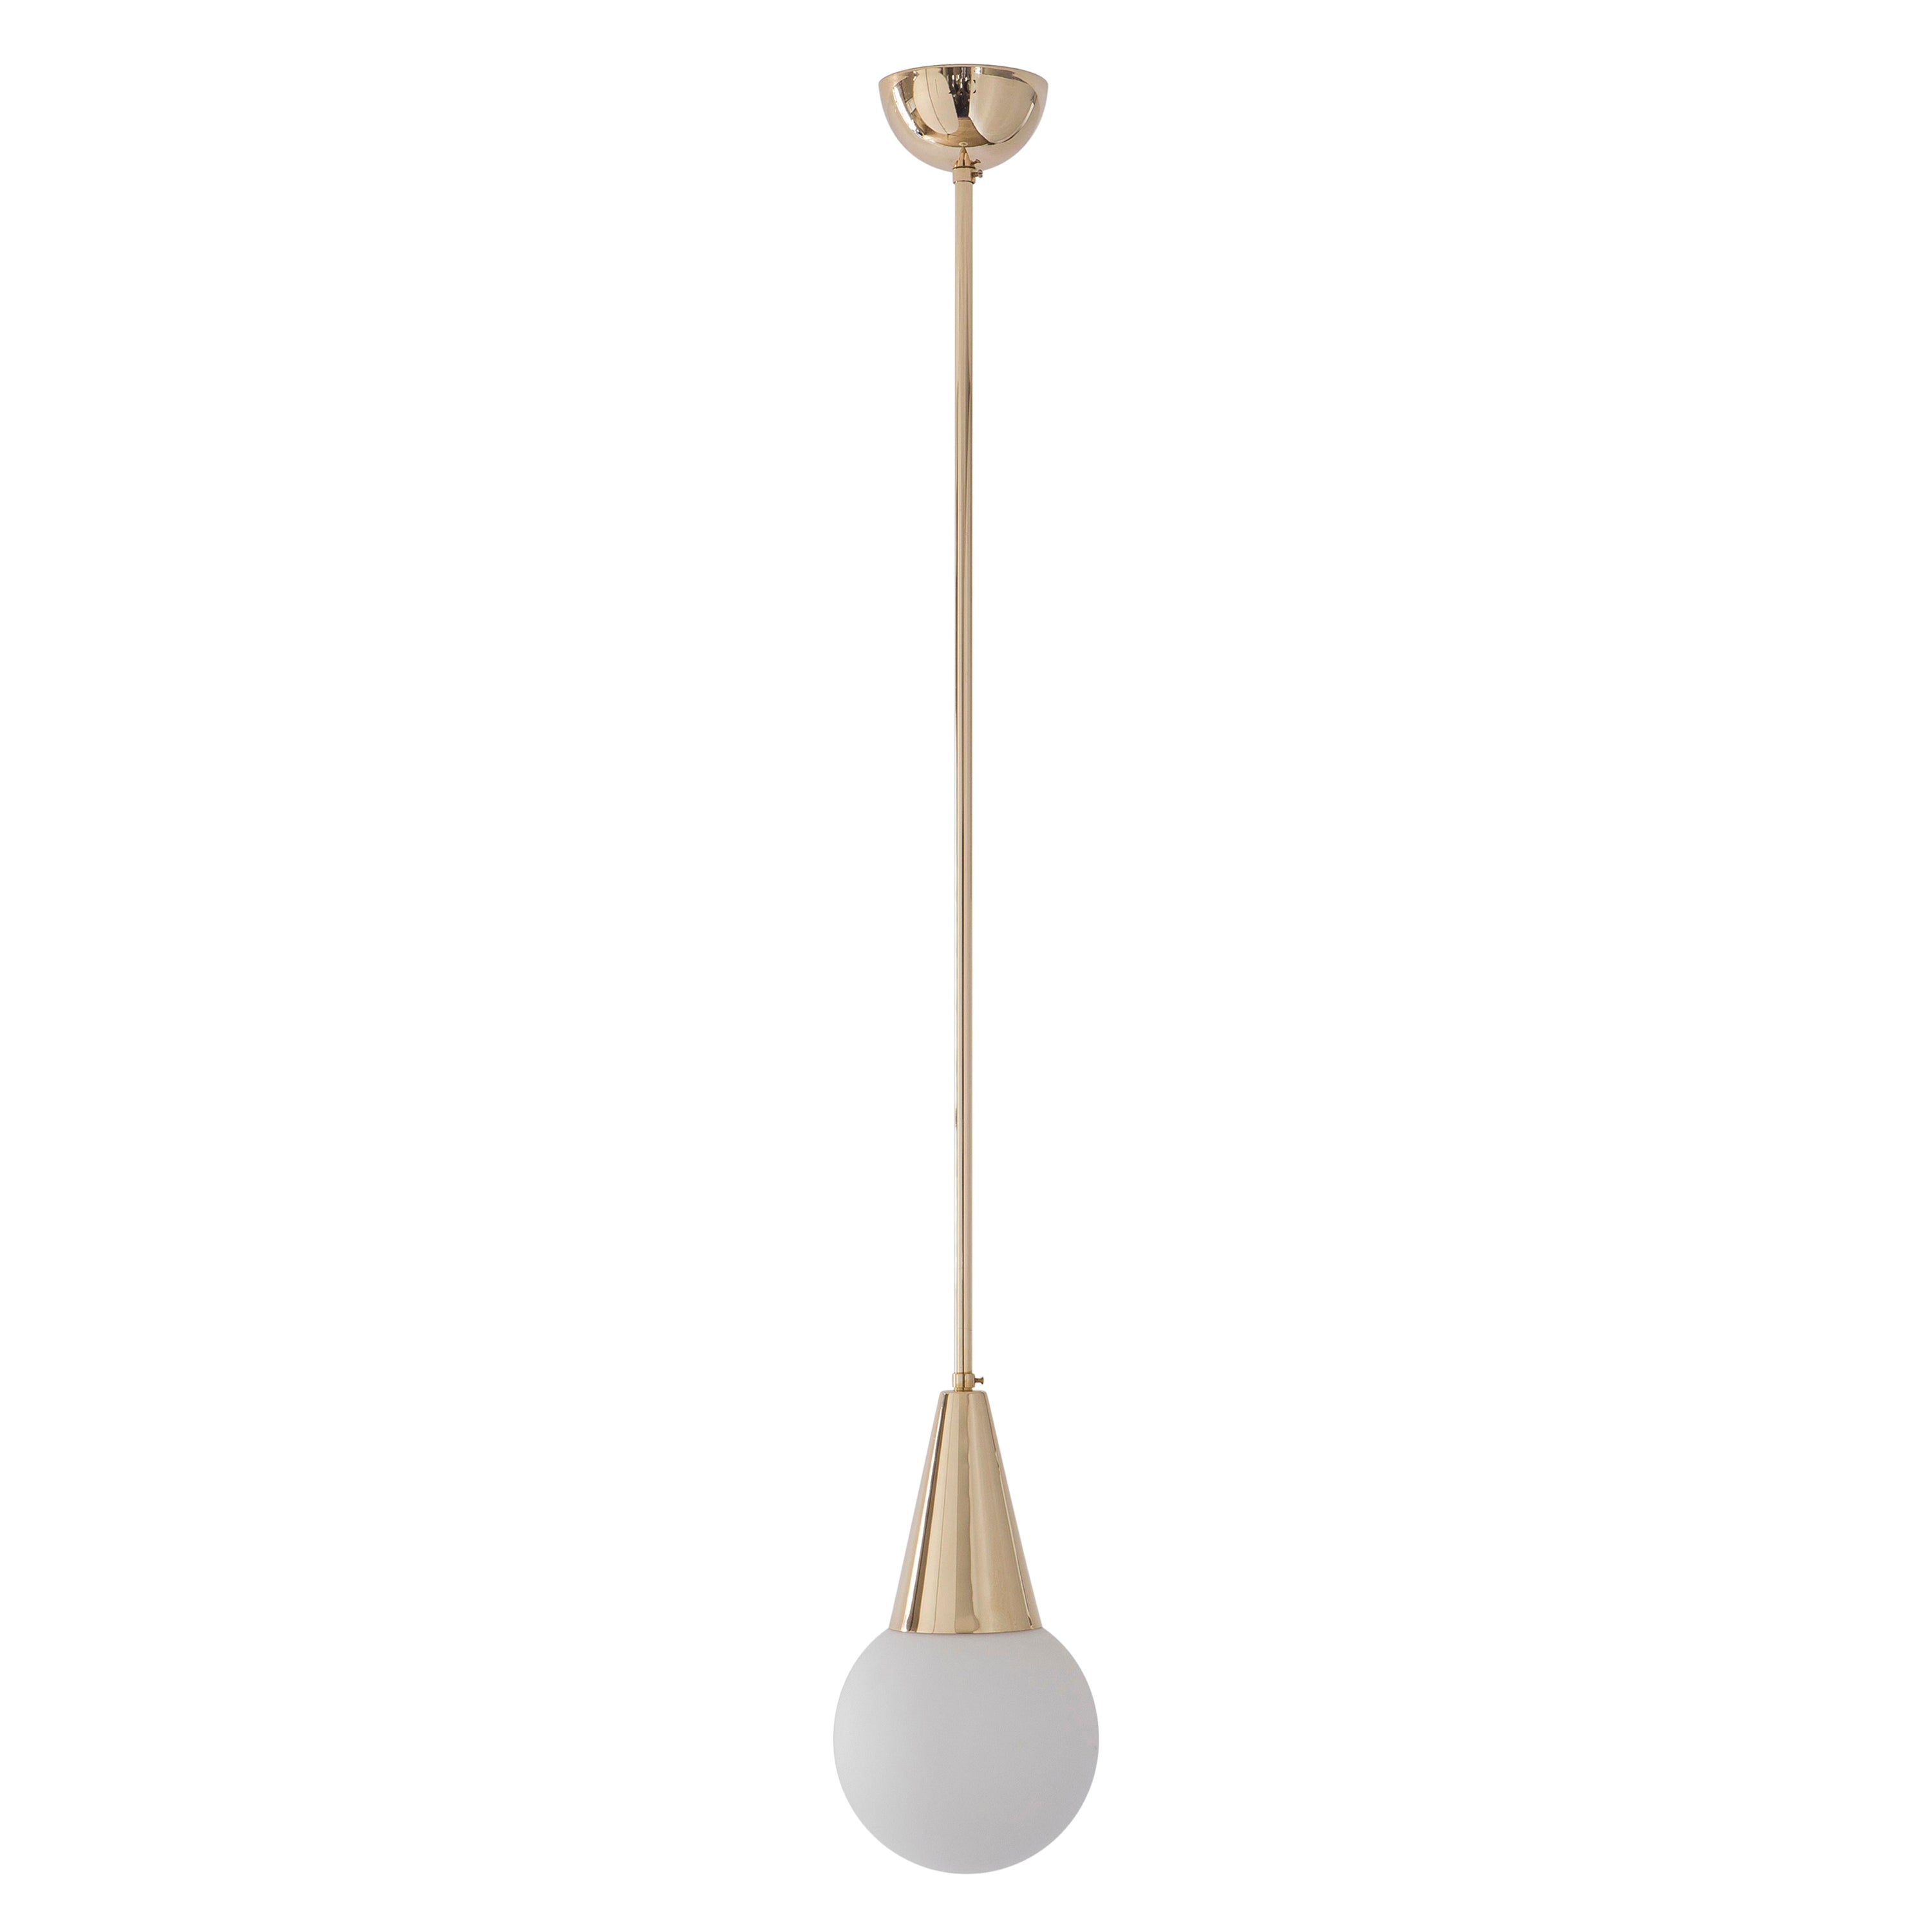 Pendant 05 by Magic Circus Editions
Dimensions: D 25 x W 25 x H 175 cm, also available in H 110, 130, 150, 190 cm
Materials: Brass, mouth blown glass

All our lamps can be wired according to each country. If sold to the USA it will be wired for